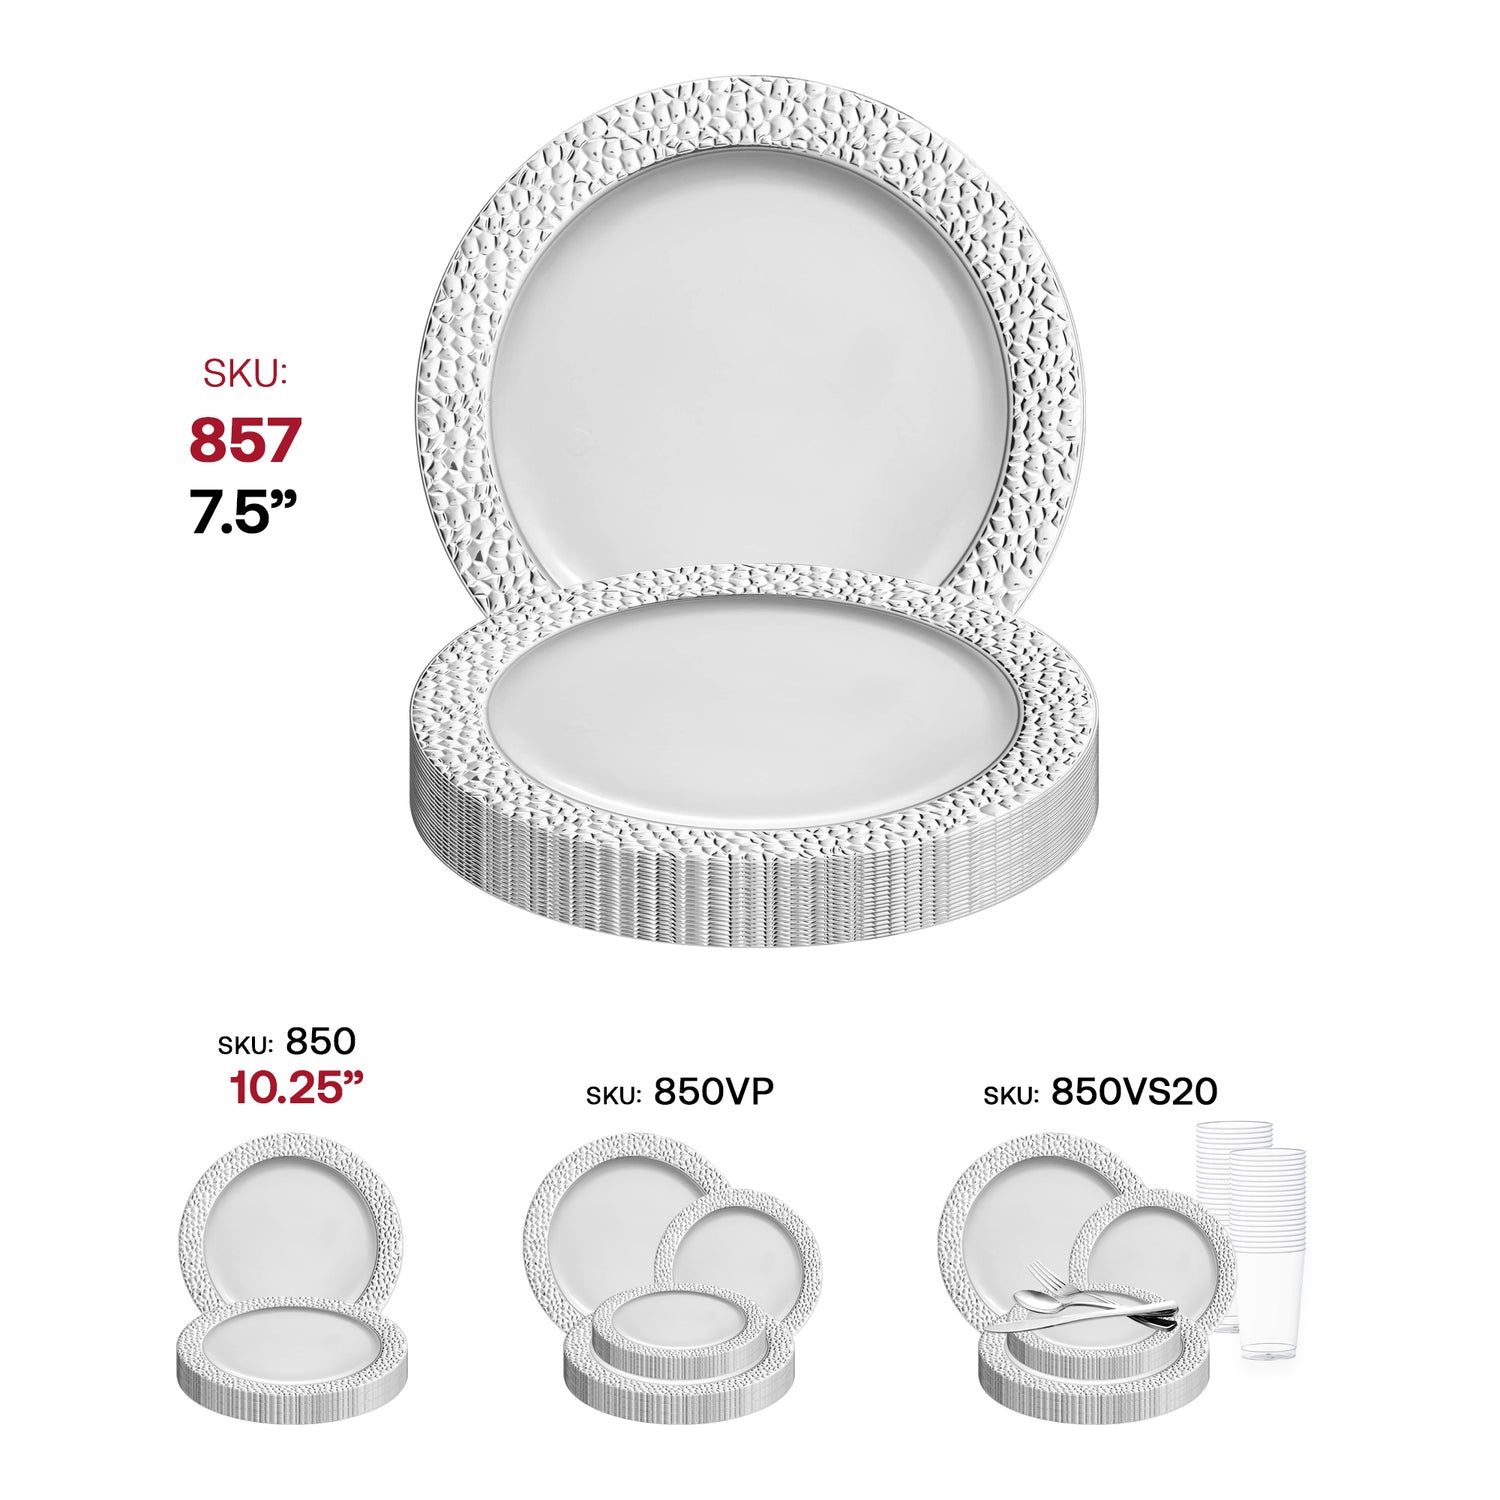 White with Silver Hammered Rim Round Plastic Appetizer/Salad Plates (7.5") SKU | The Kaya Collection